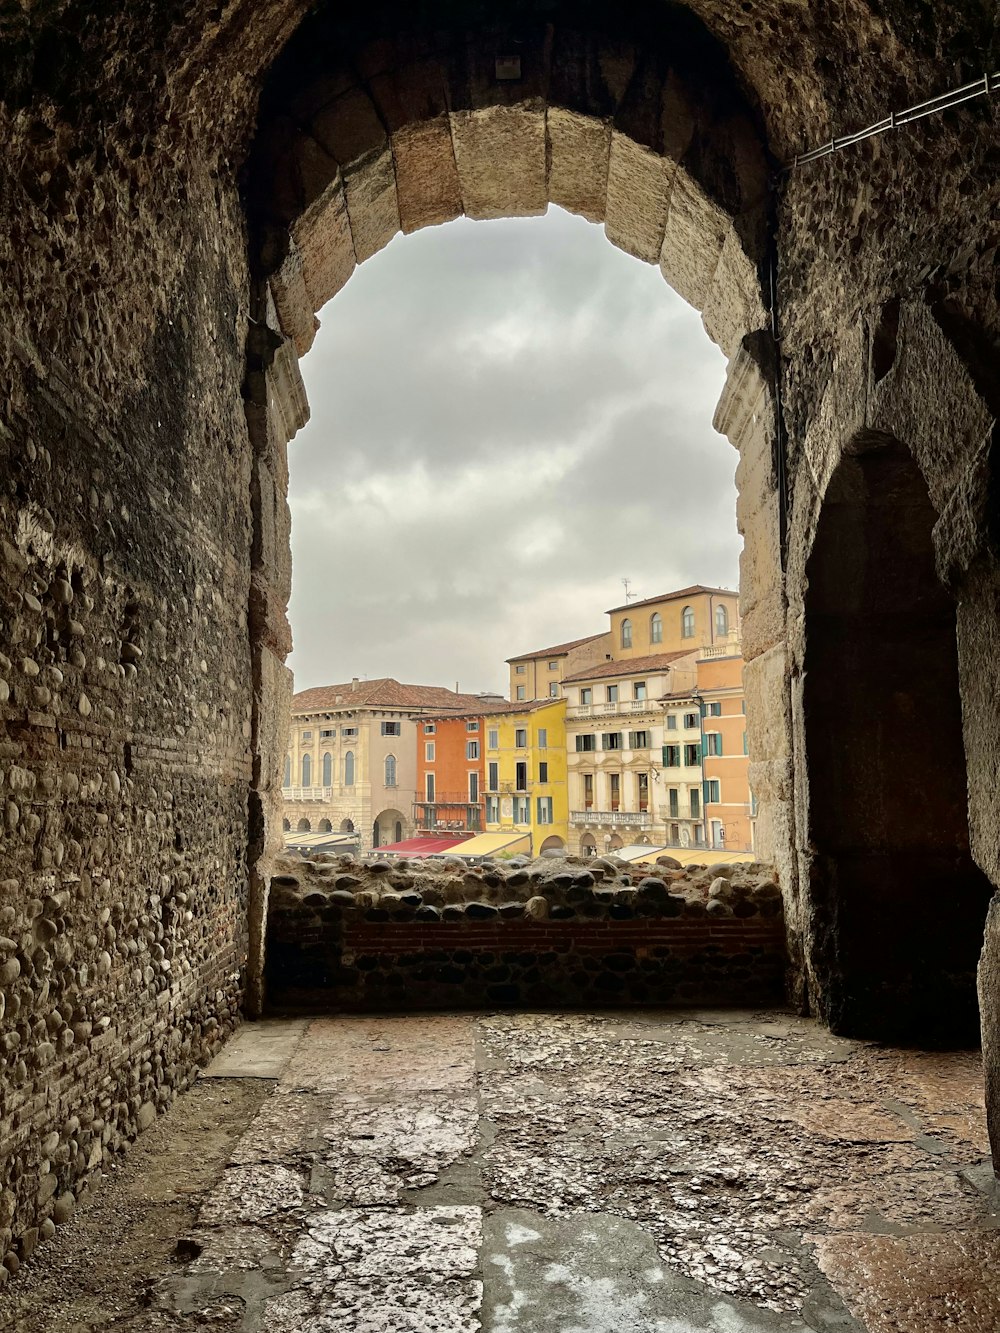 a view of a city through a stone archway